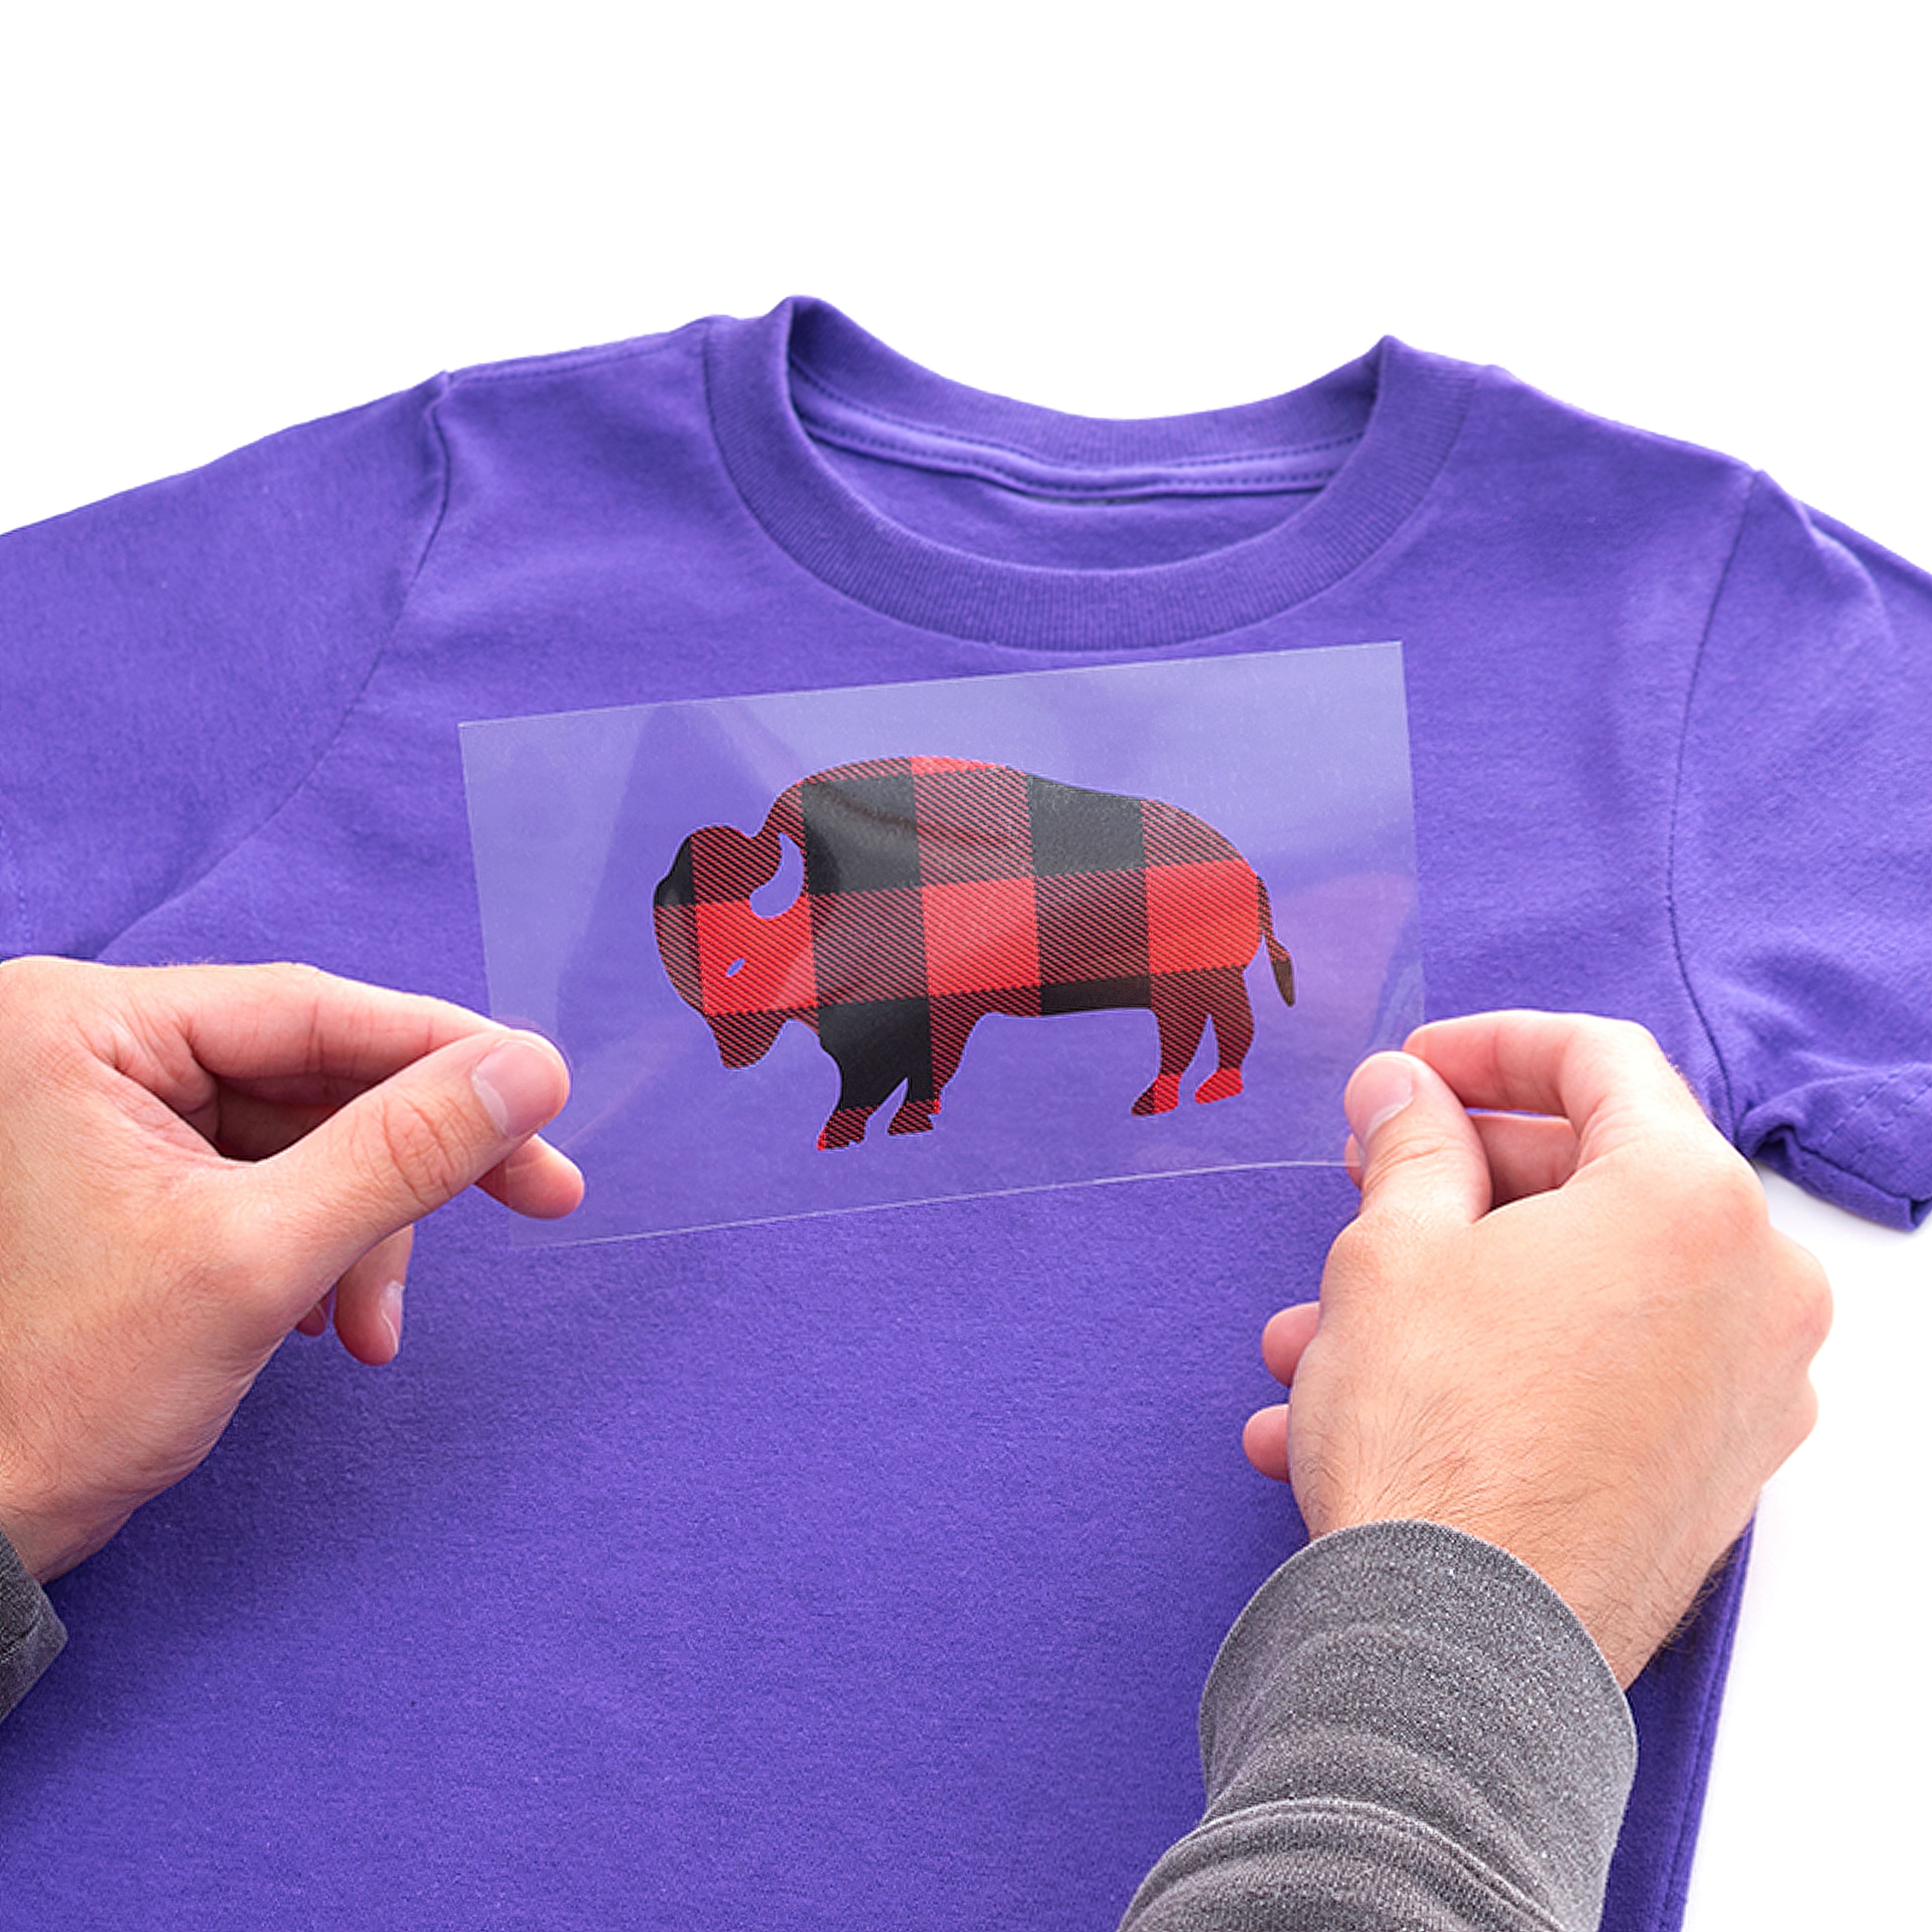 Red Buffalo Plaid Pattern Heat Transfer Vinyl and Carrier Sheet